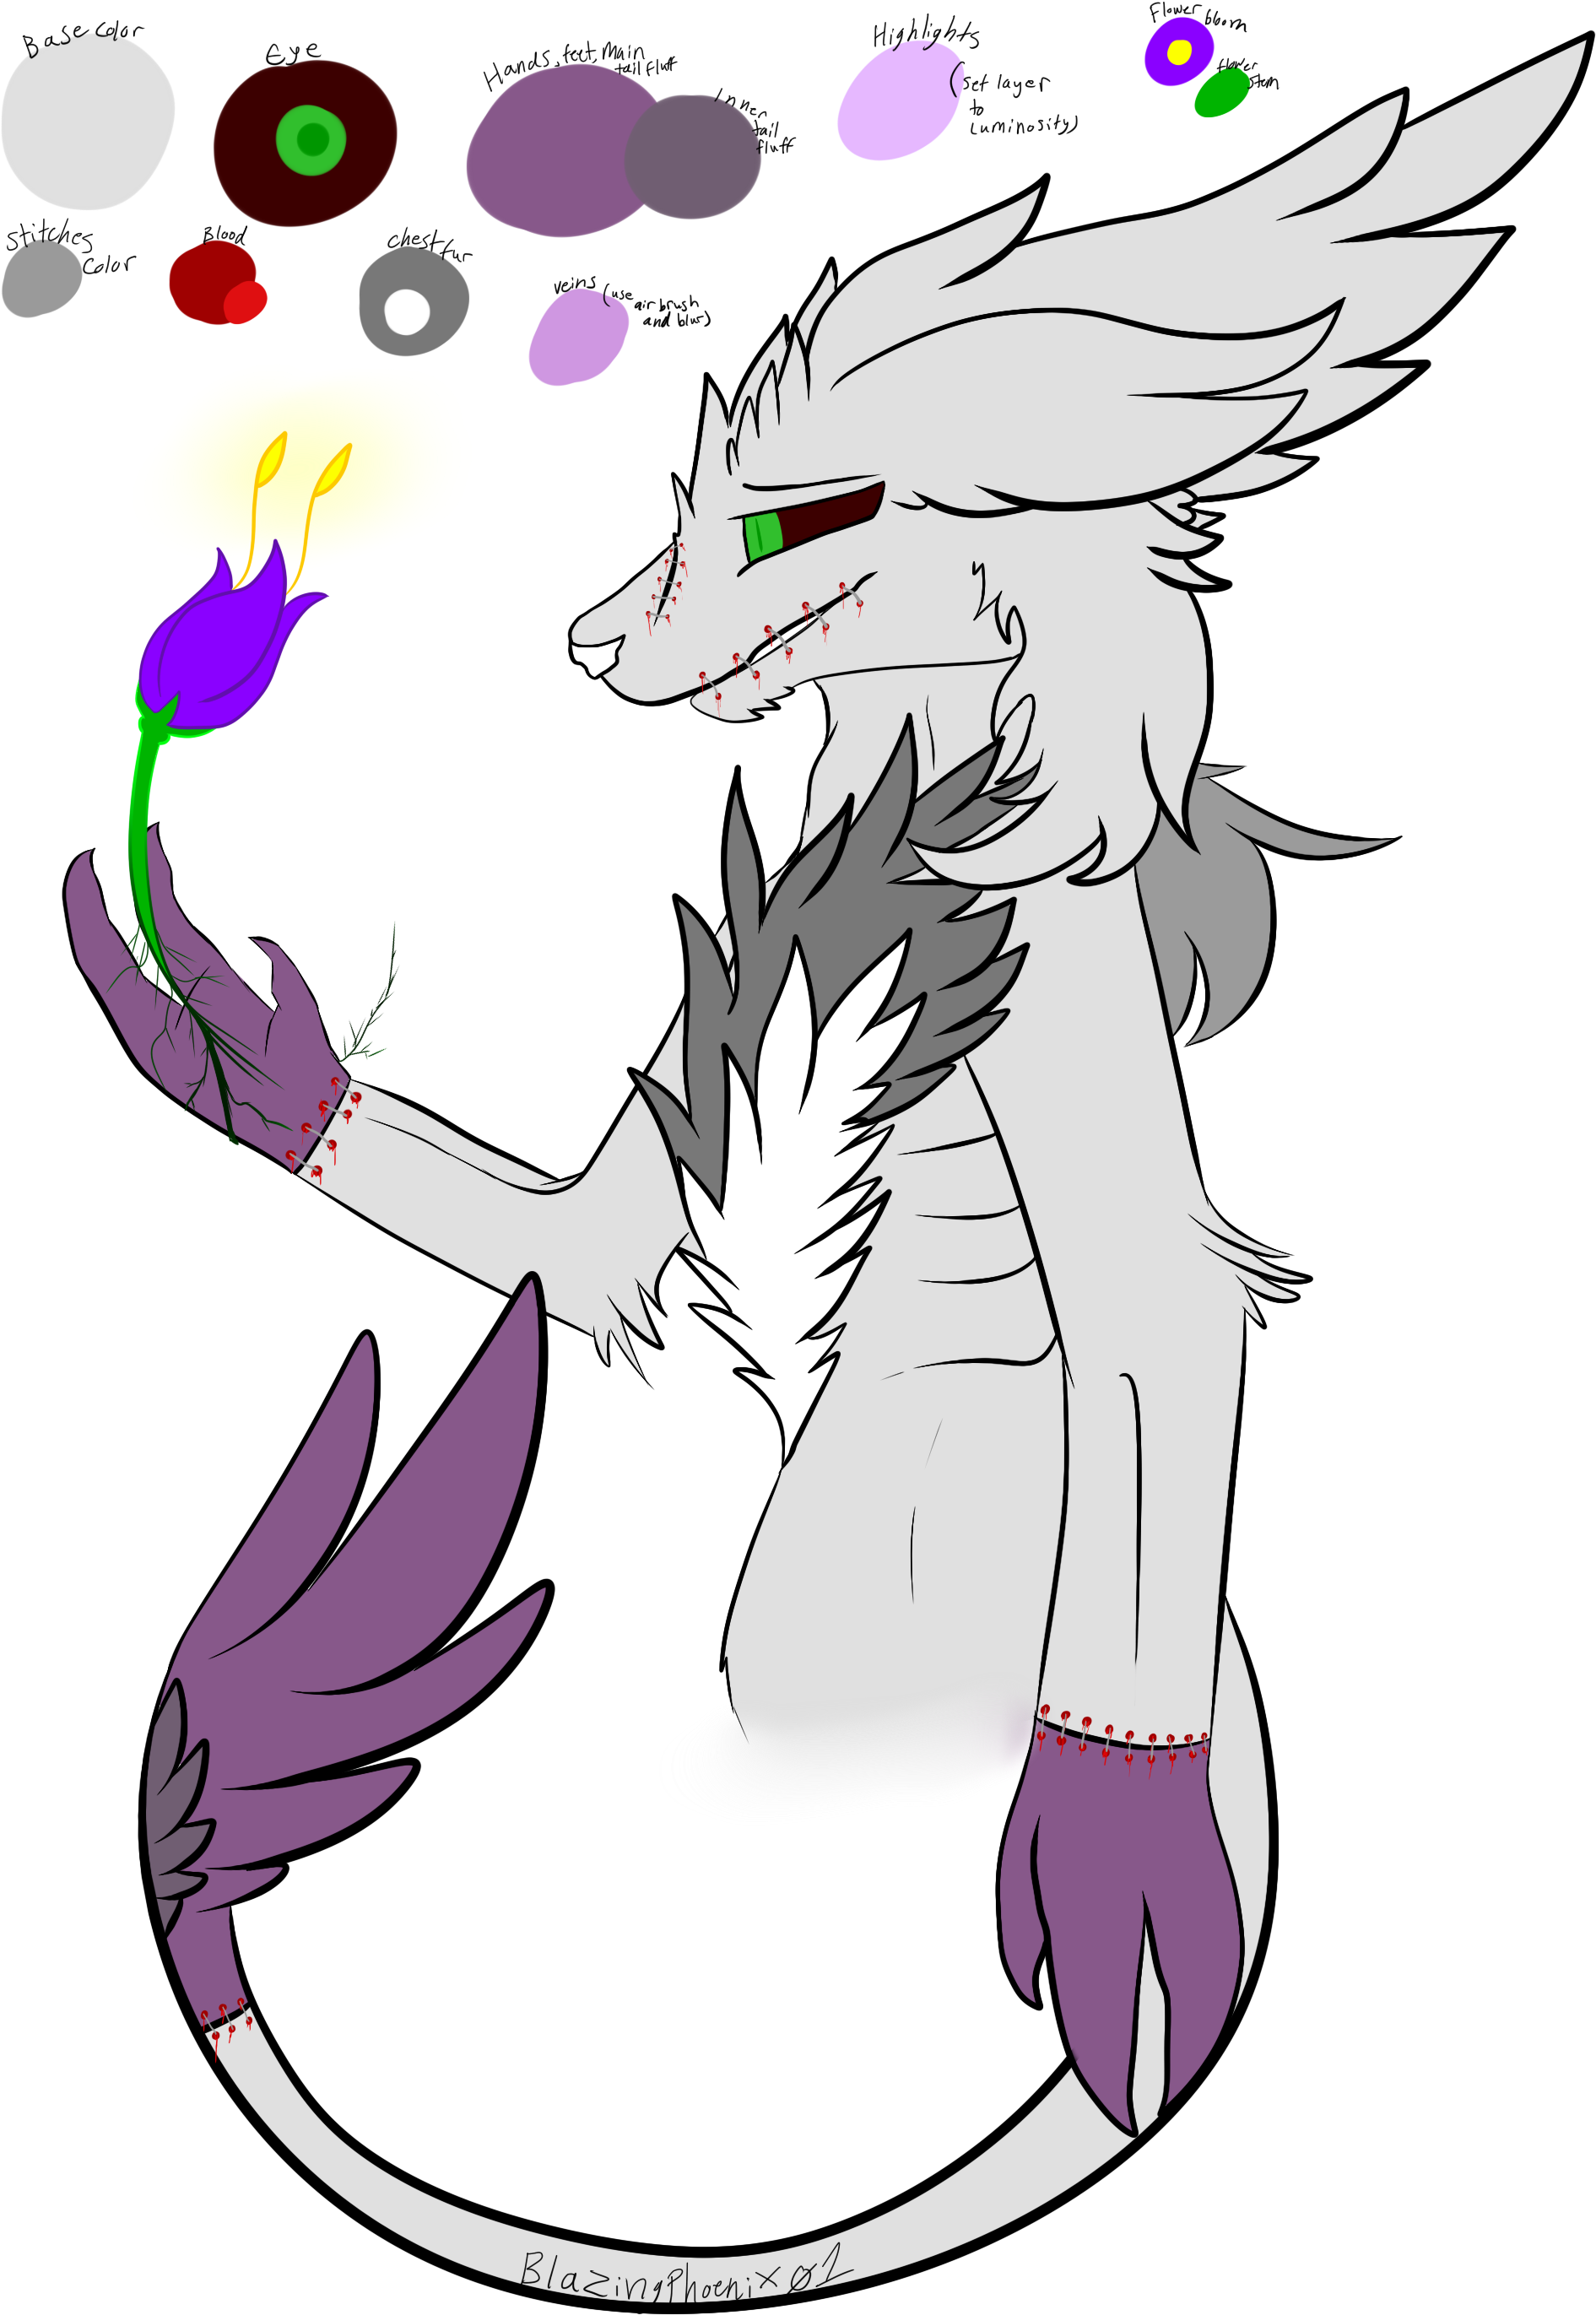 A Cartoon Of A Purple And White Creature Holding A Purple Flower